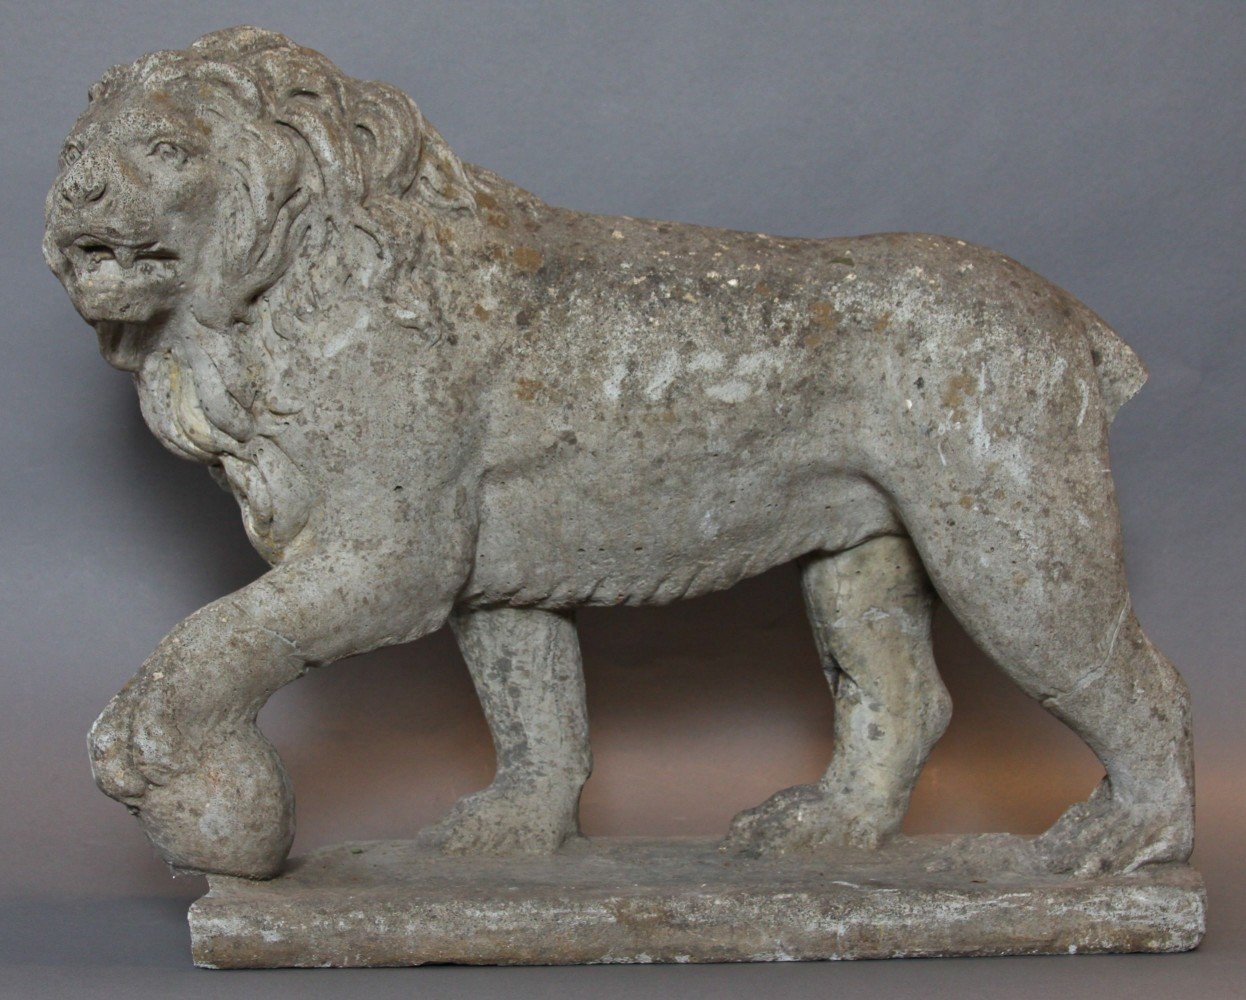 A Cast Stone Figure in the Style of a Medici Lion by 20th Century School